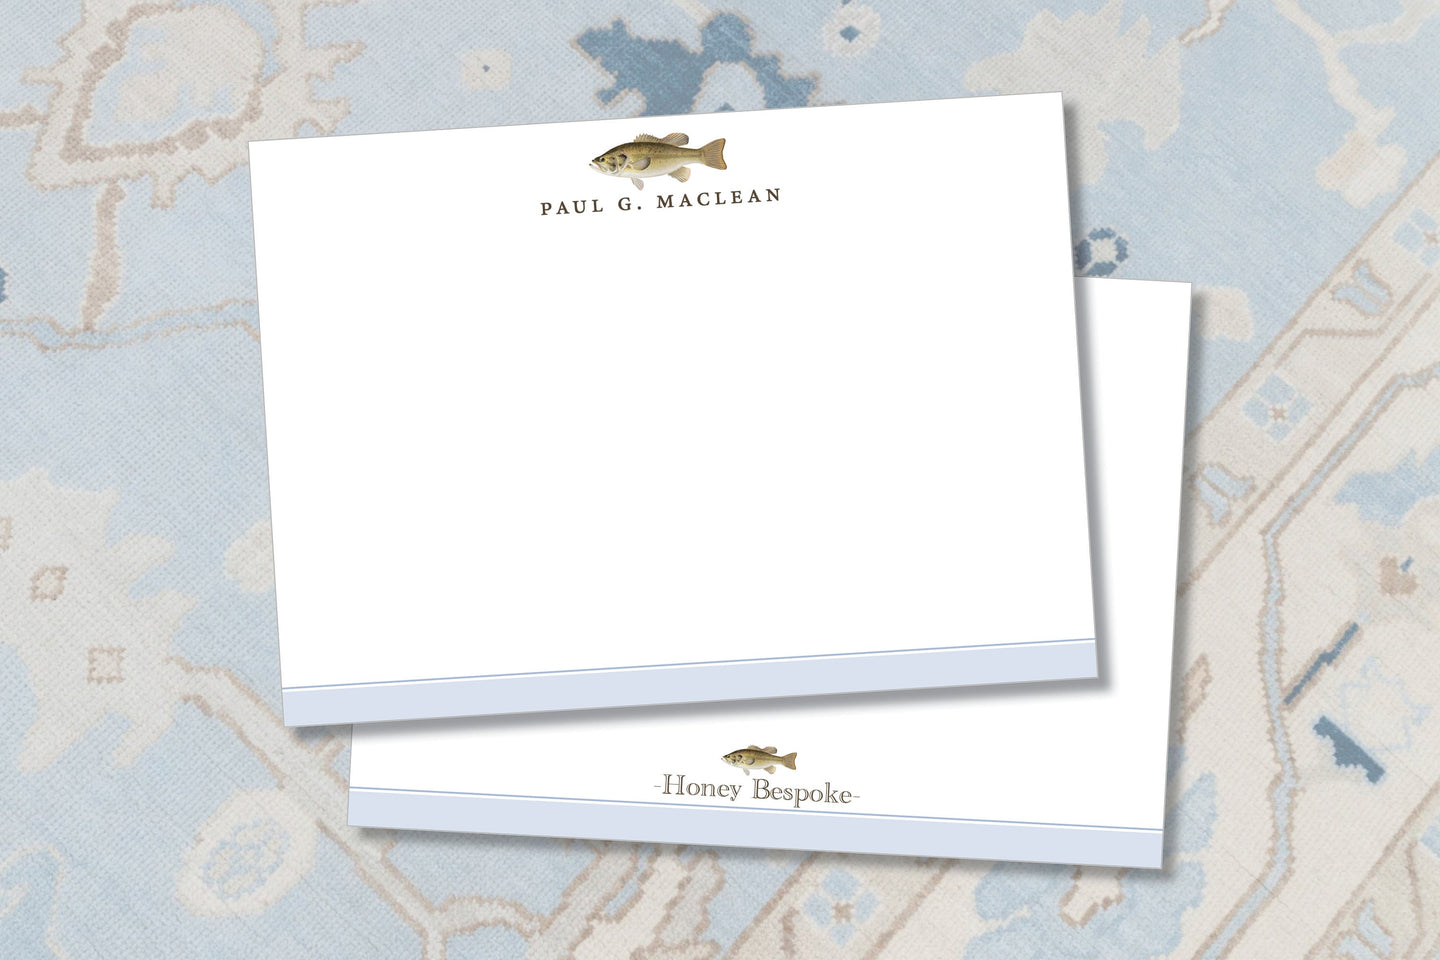 Watercolor Personalized Large Mouth Bass Stationery / Stationery for Fishermen / Boys Fishing Stationery / Classic / Preppy / Bass